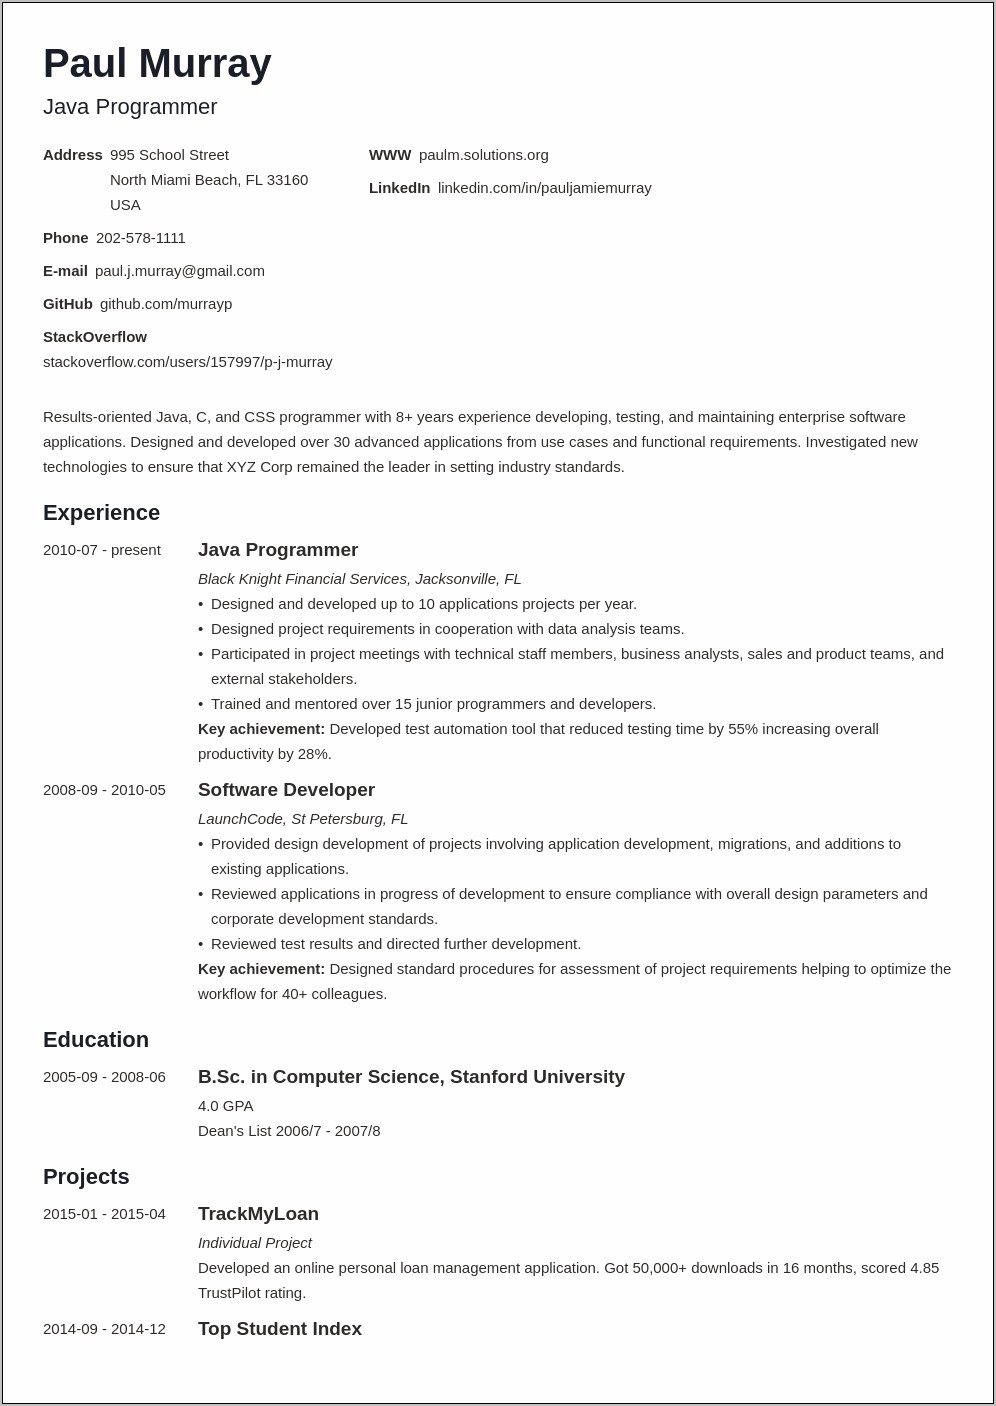 Examples Of School Projects For Resume